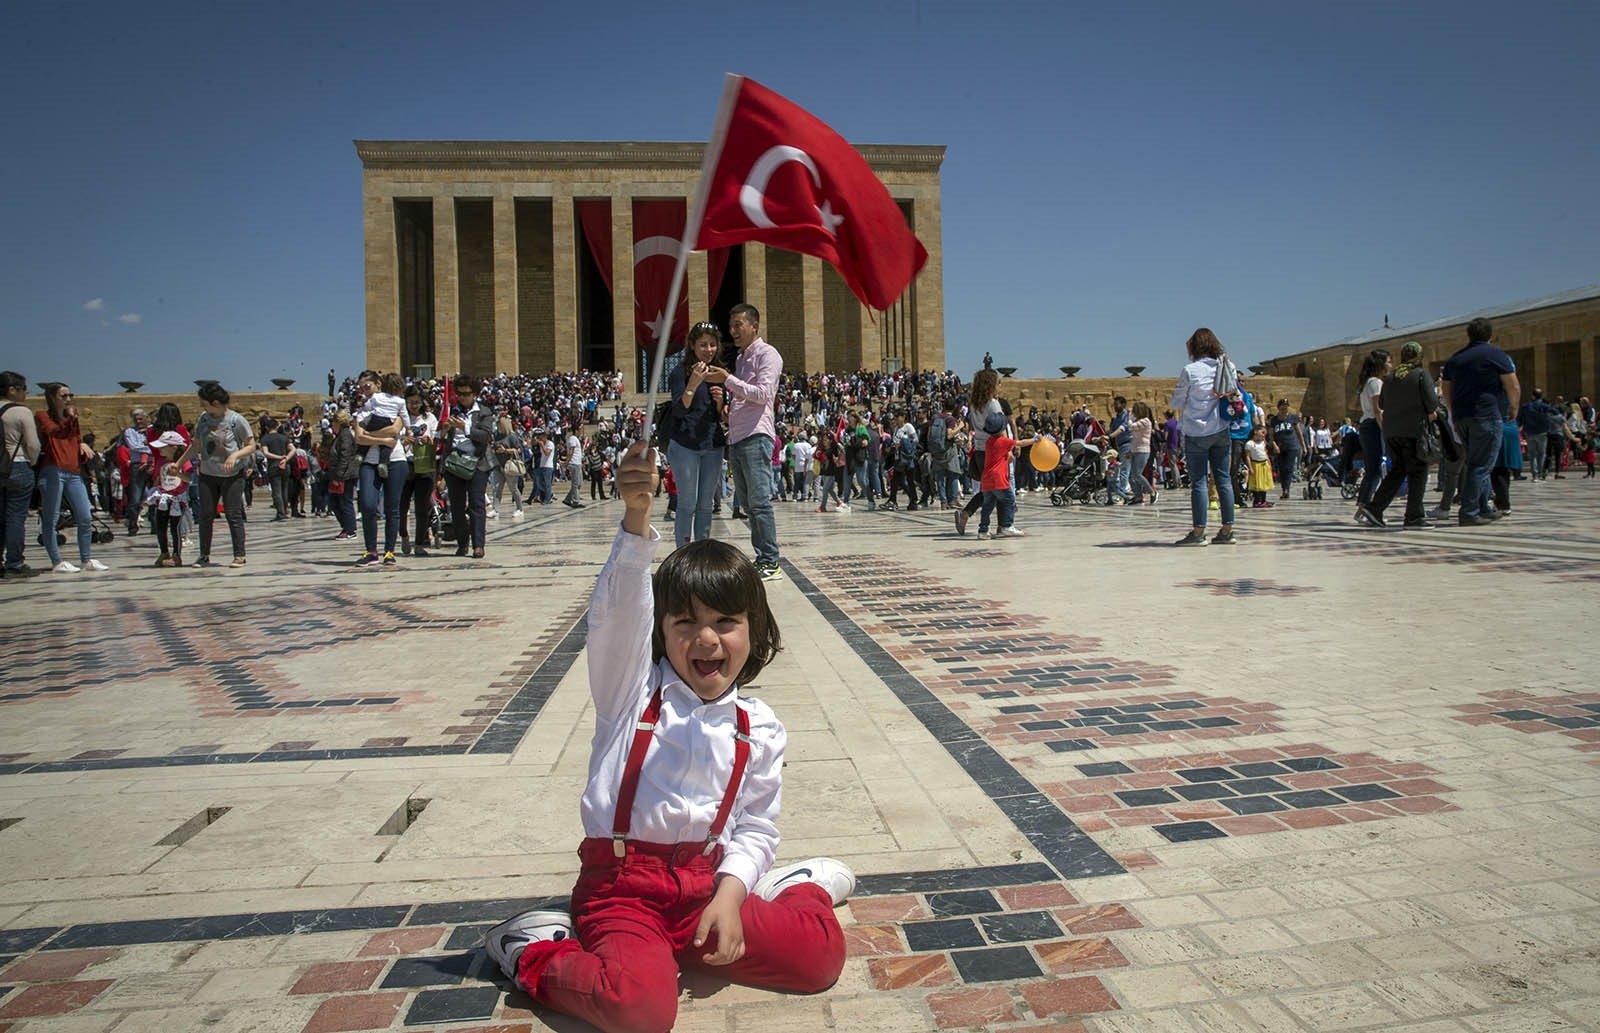 Millions of children throughout Turkey mark National Sovereignty and Children’s Day with dances and celebrations